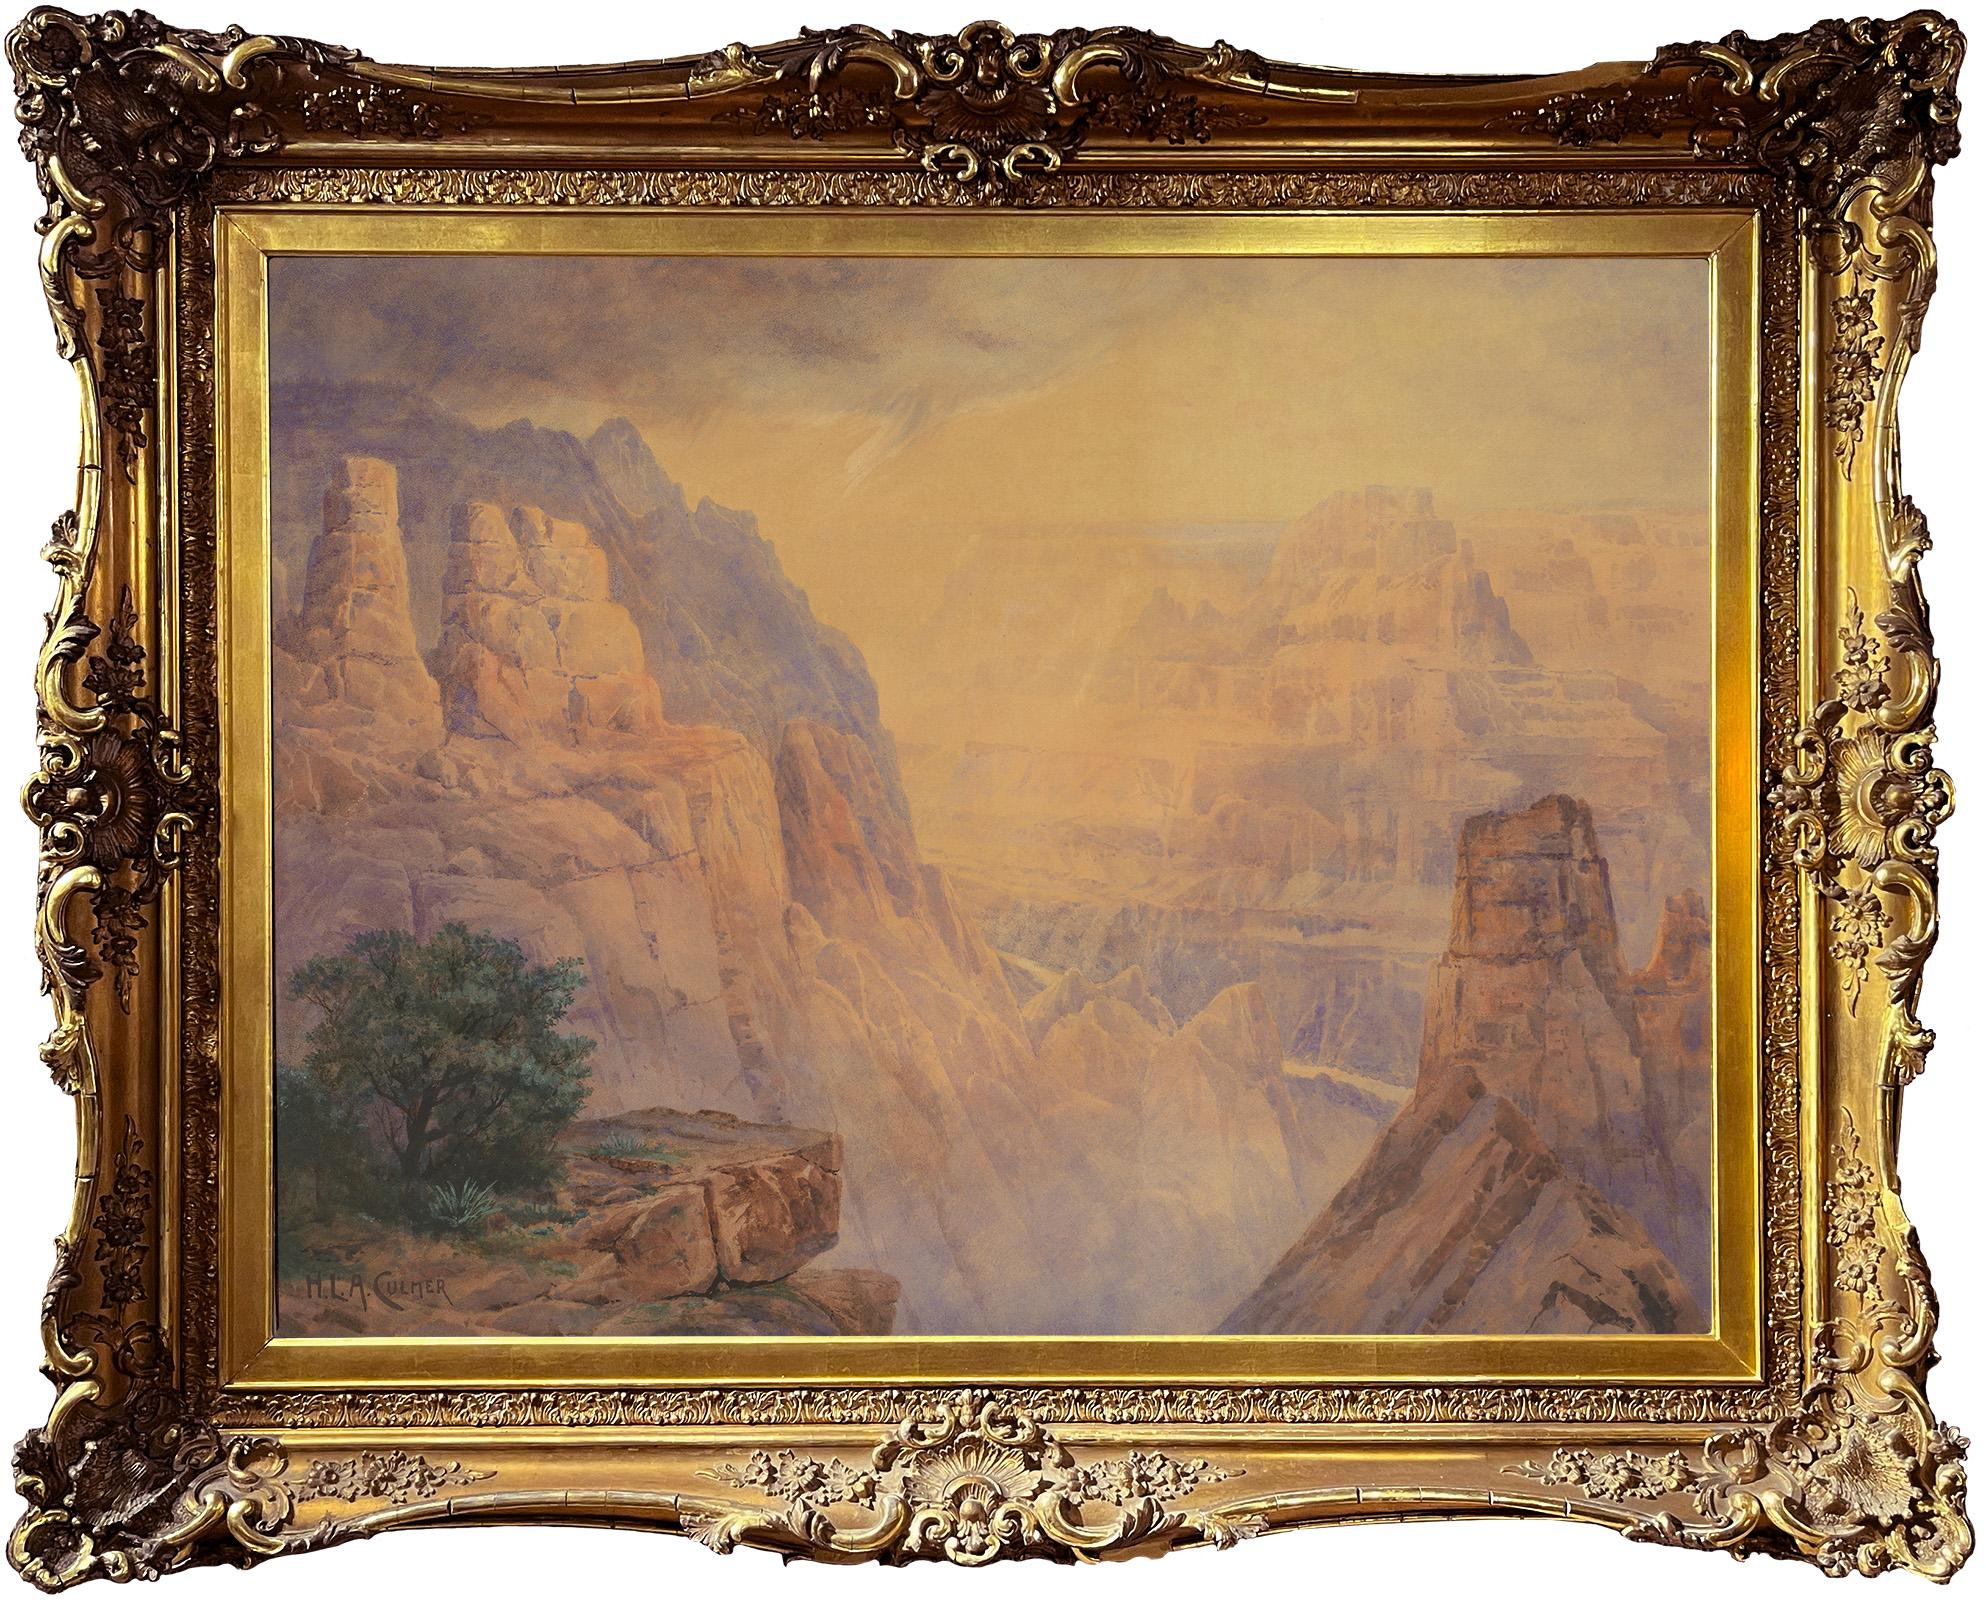 Henry Adolphus Lavender Culmer Landscape Painting - Grand Canyon of the Colorado in Arizona by H.L.A. Culmer